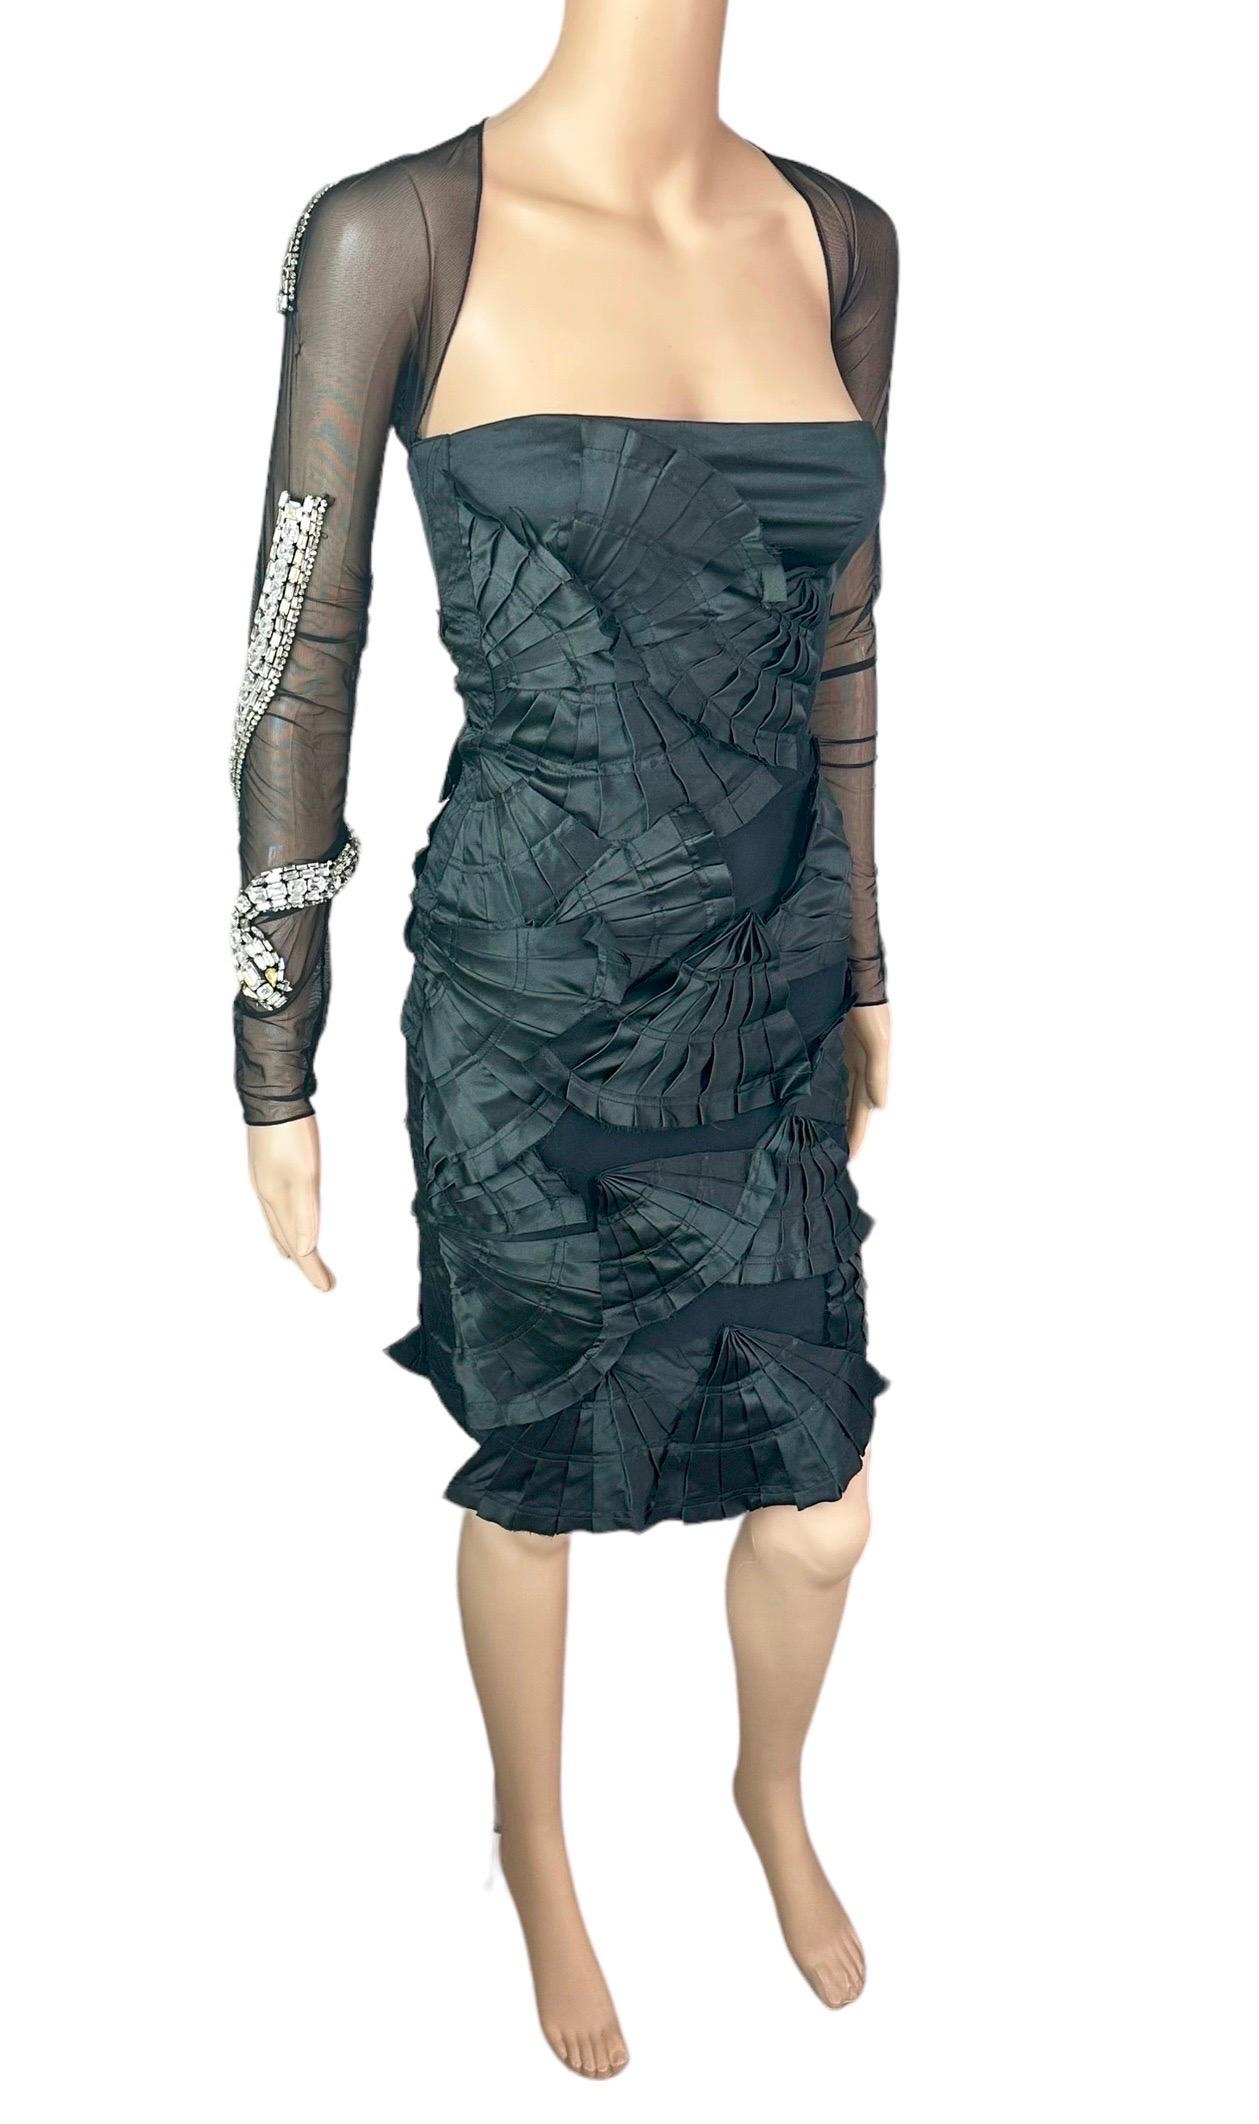 Tom Ford for Gucci S/S 2004 Runway Embellished Snake Sheer Cutout Black Dress For Sale 3